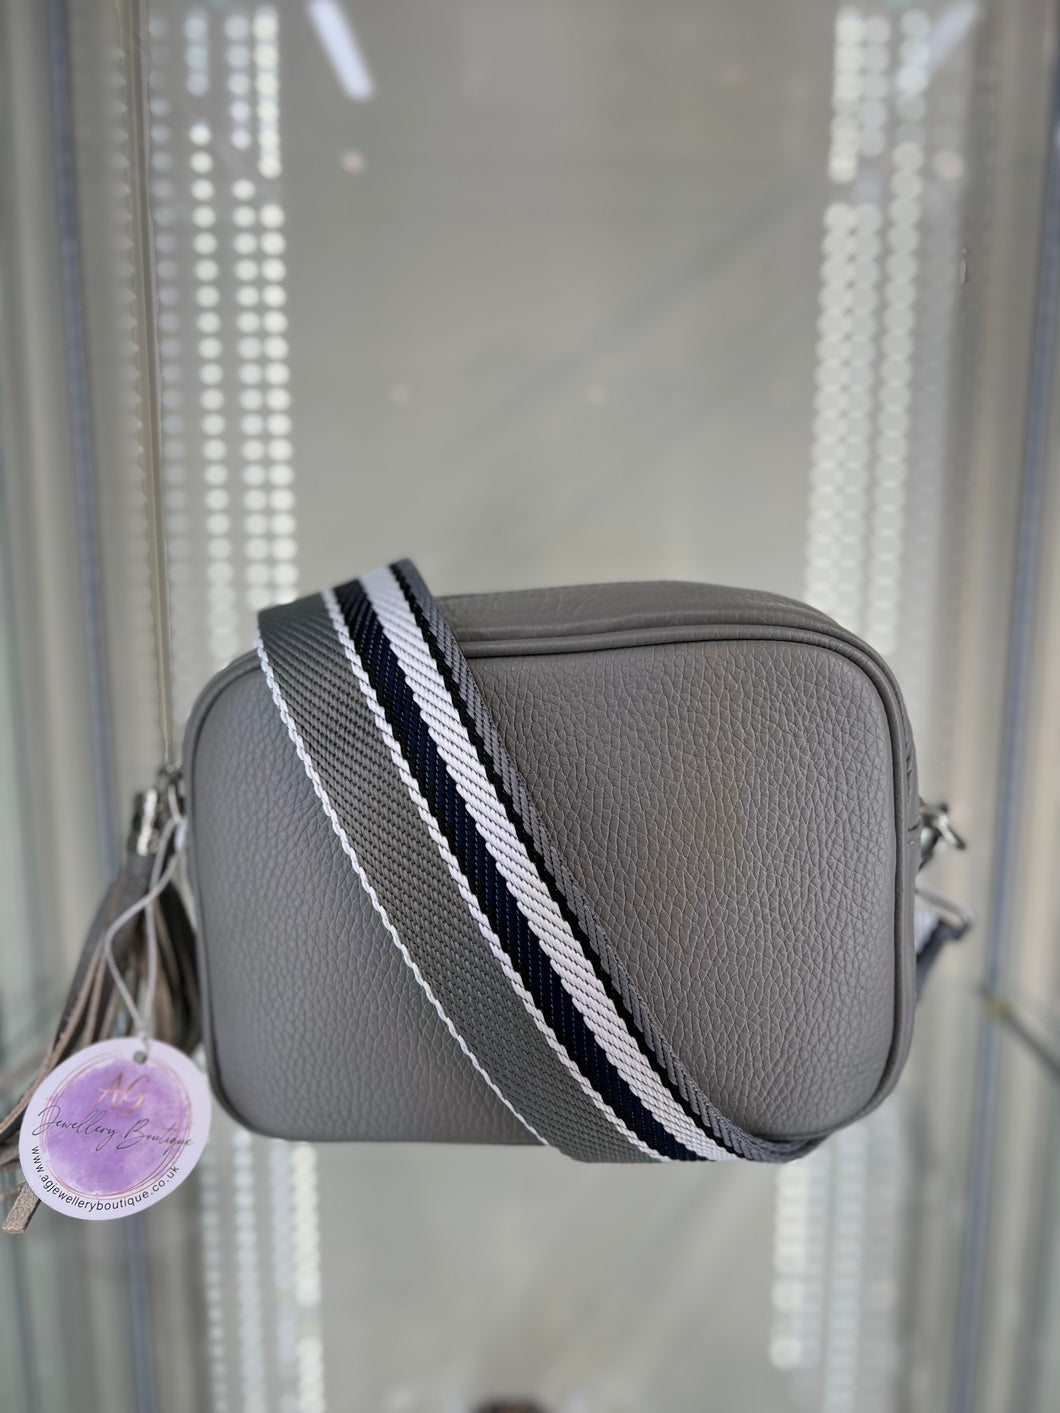 Real Leather Leather Handbag with Navy/Grey/White Striped strap